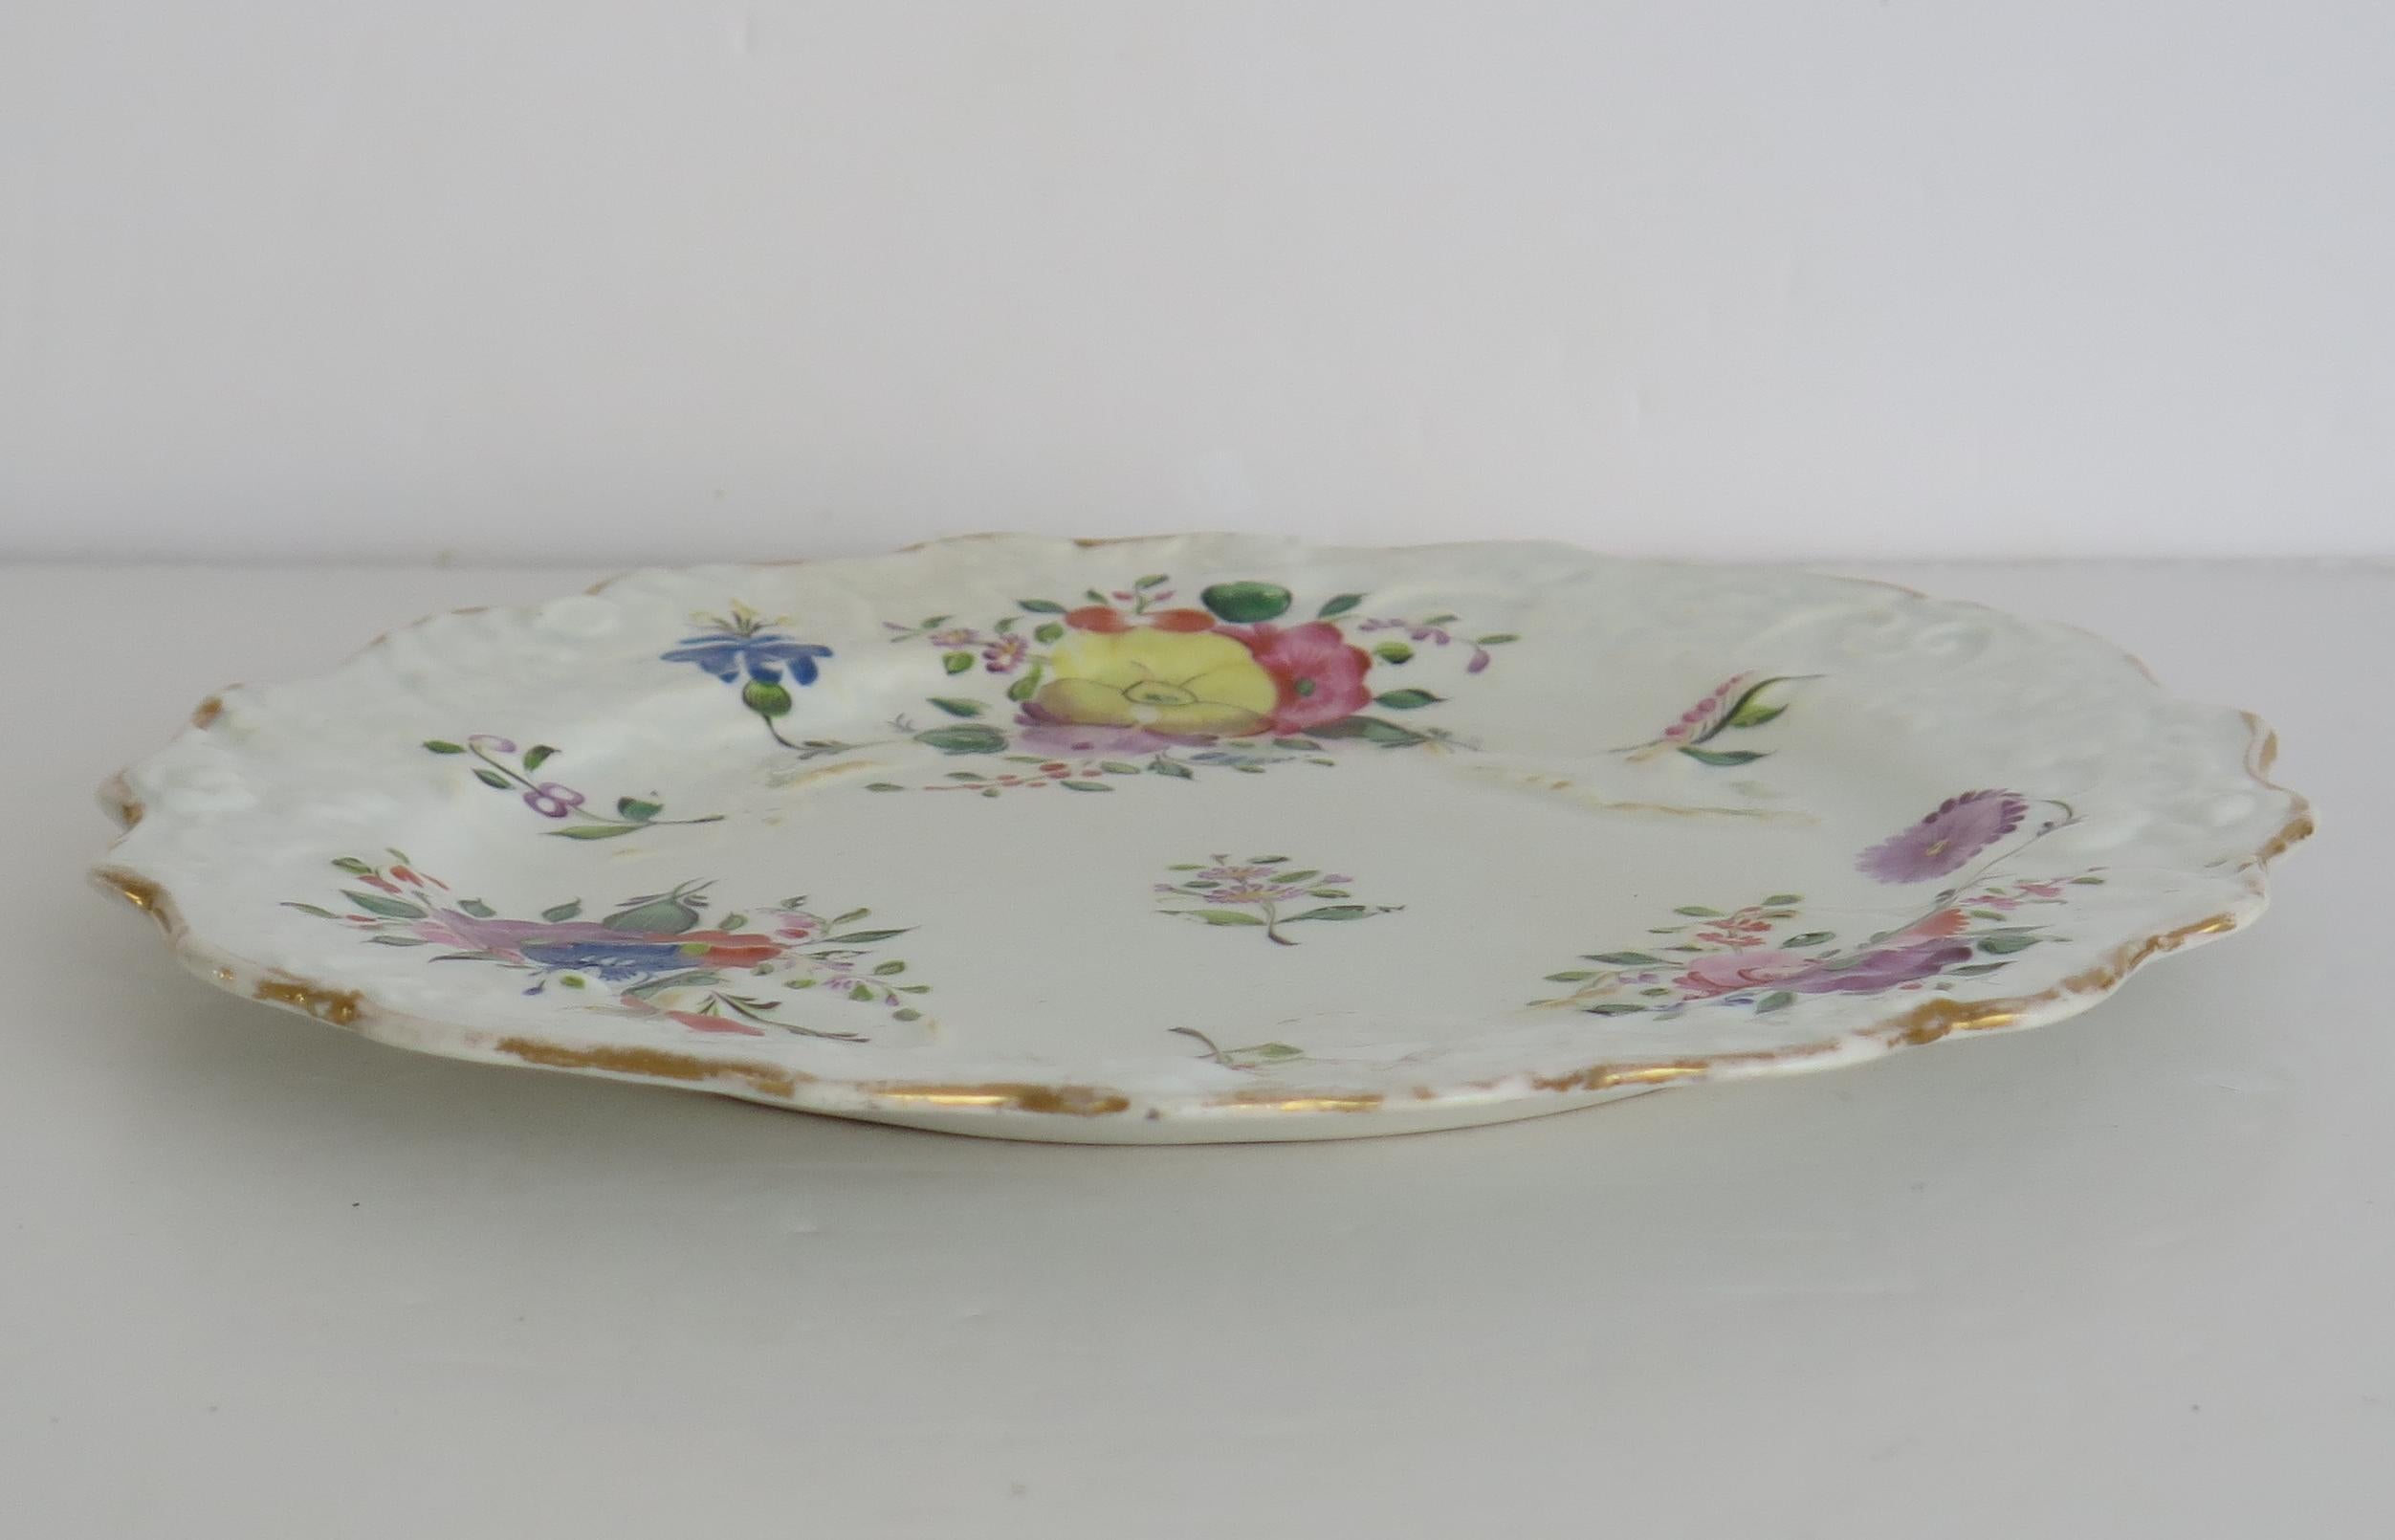 Mason's Porcelain Plate Hand Painted in Central Spray Mixed Border Ptn, Ca 1815 For Sale 2